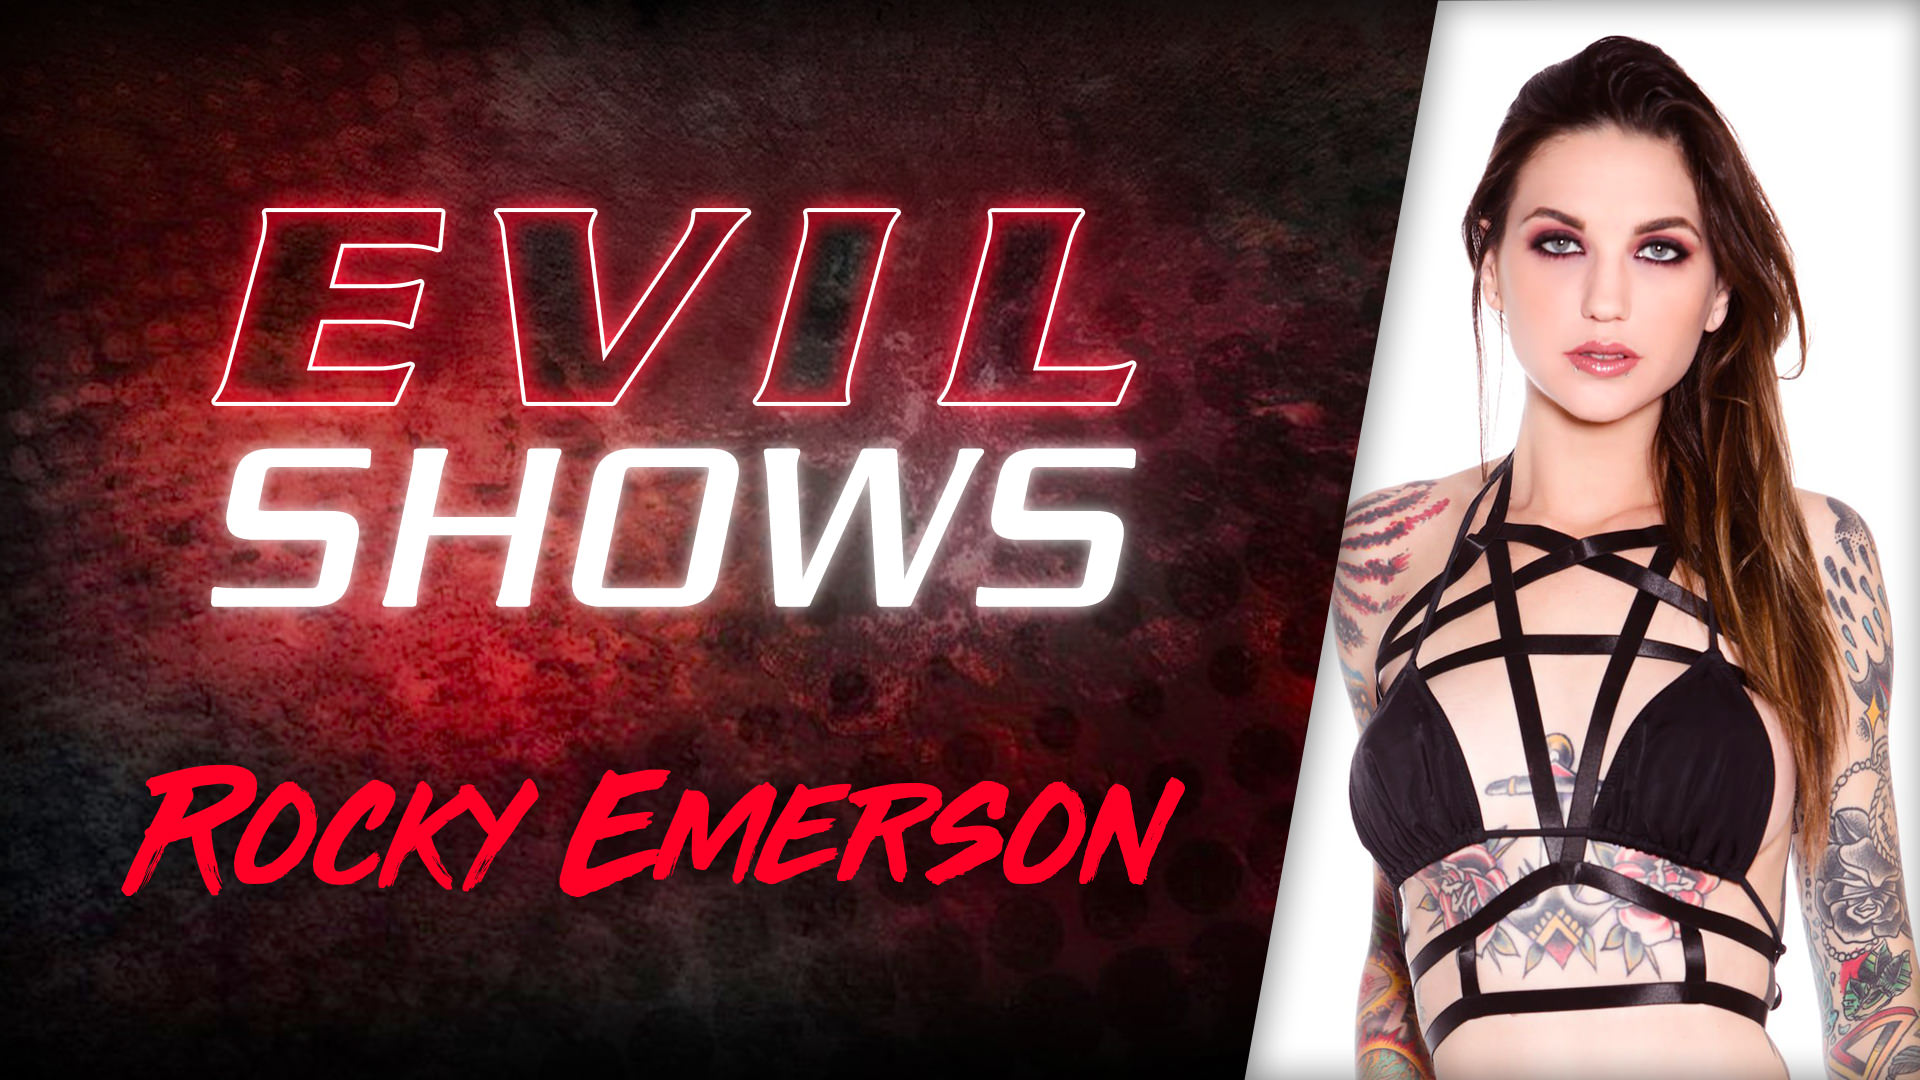 Evil shows rocky emerson rocky emerson Inked babe with